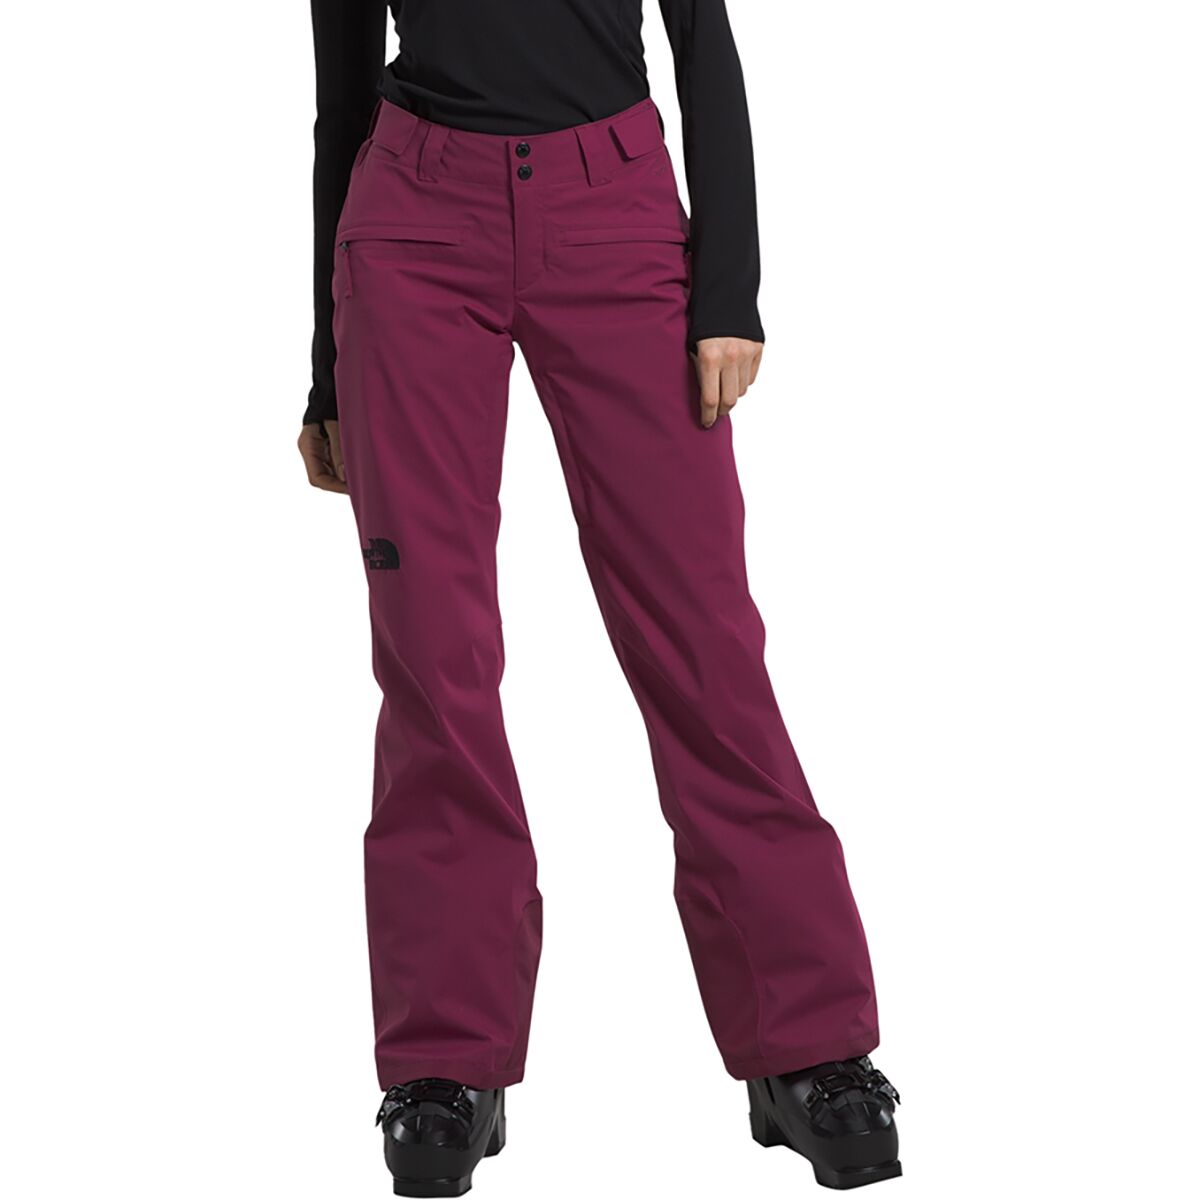 The North Face Pants 10 Black Womens Light Weight Drawstring Solid Neutral  - $46 - From Savannah